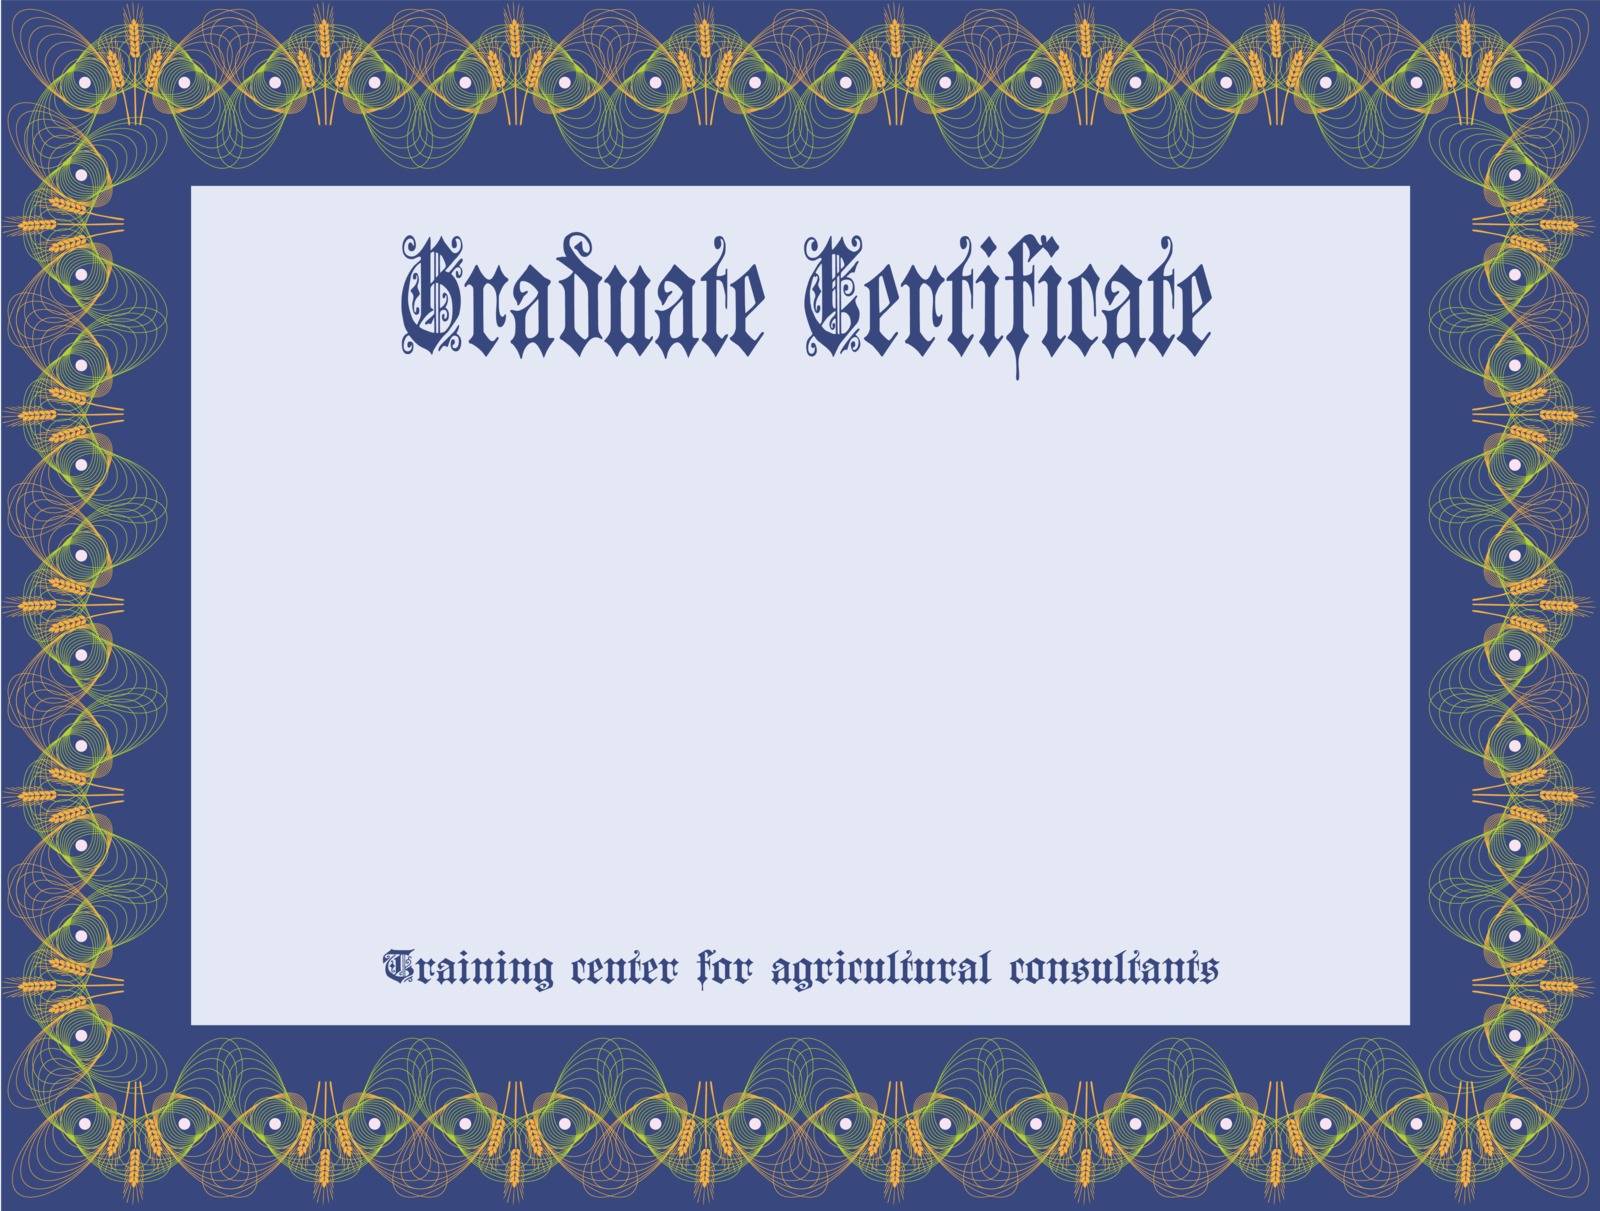 Certificate Training Center of agricultural consultants. Vector illustration.